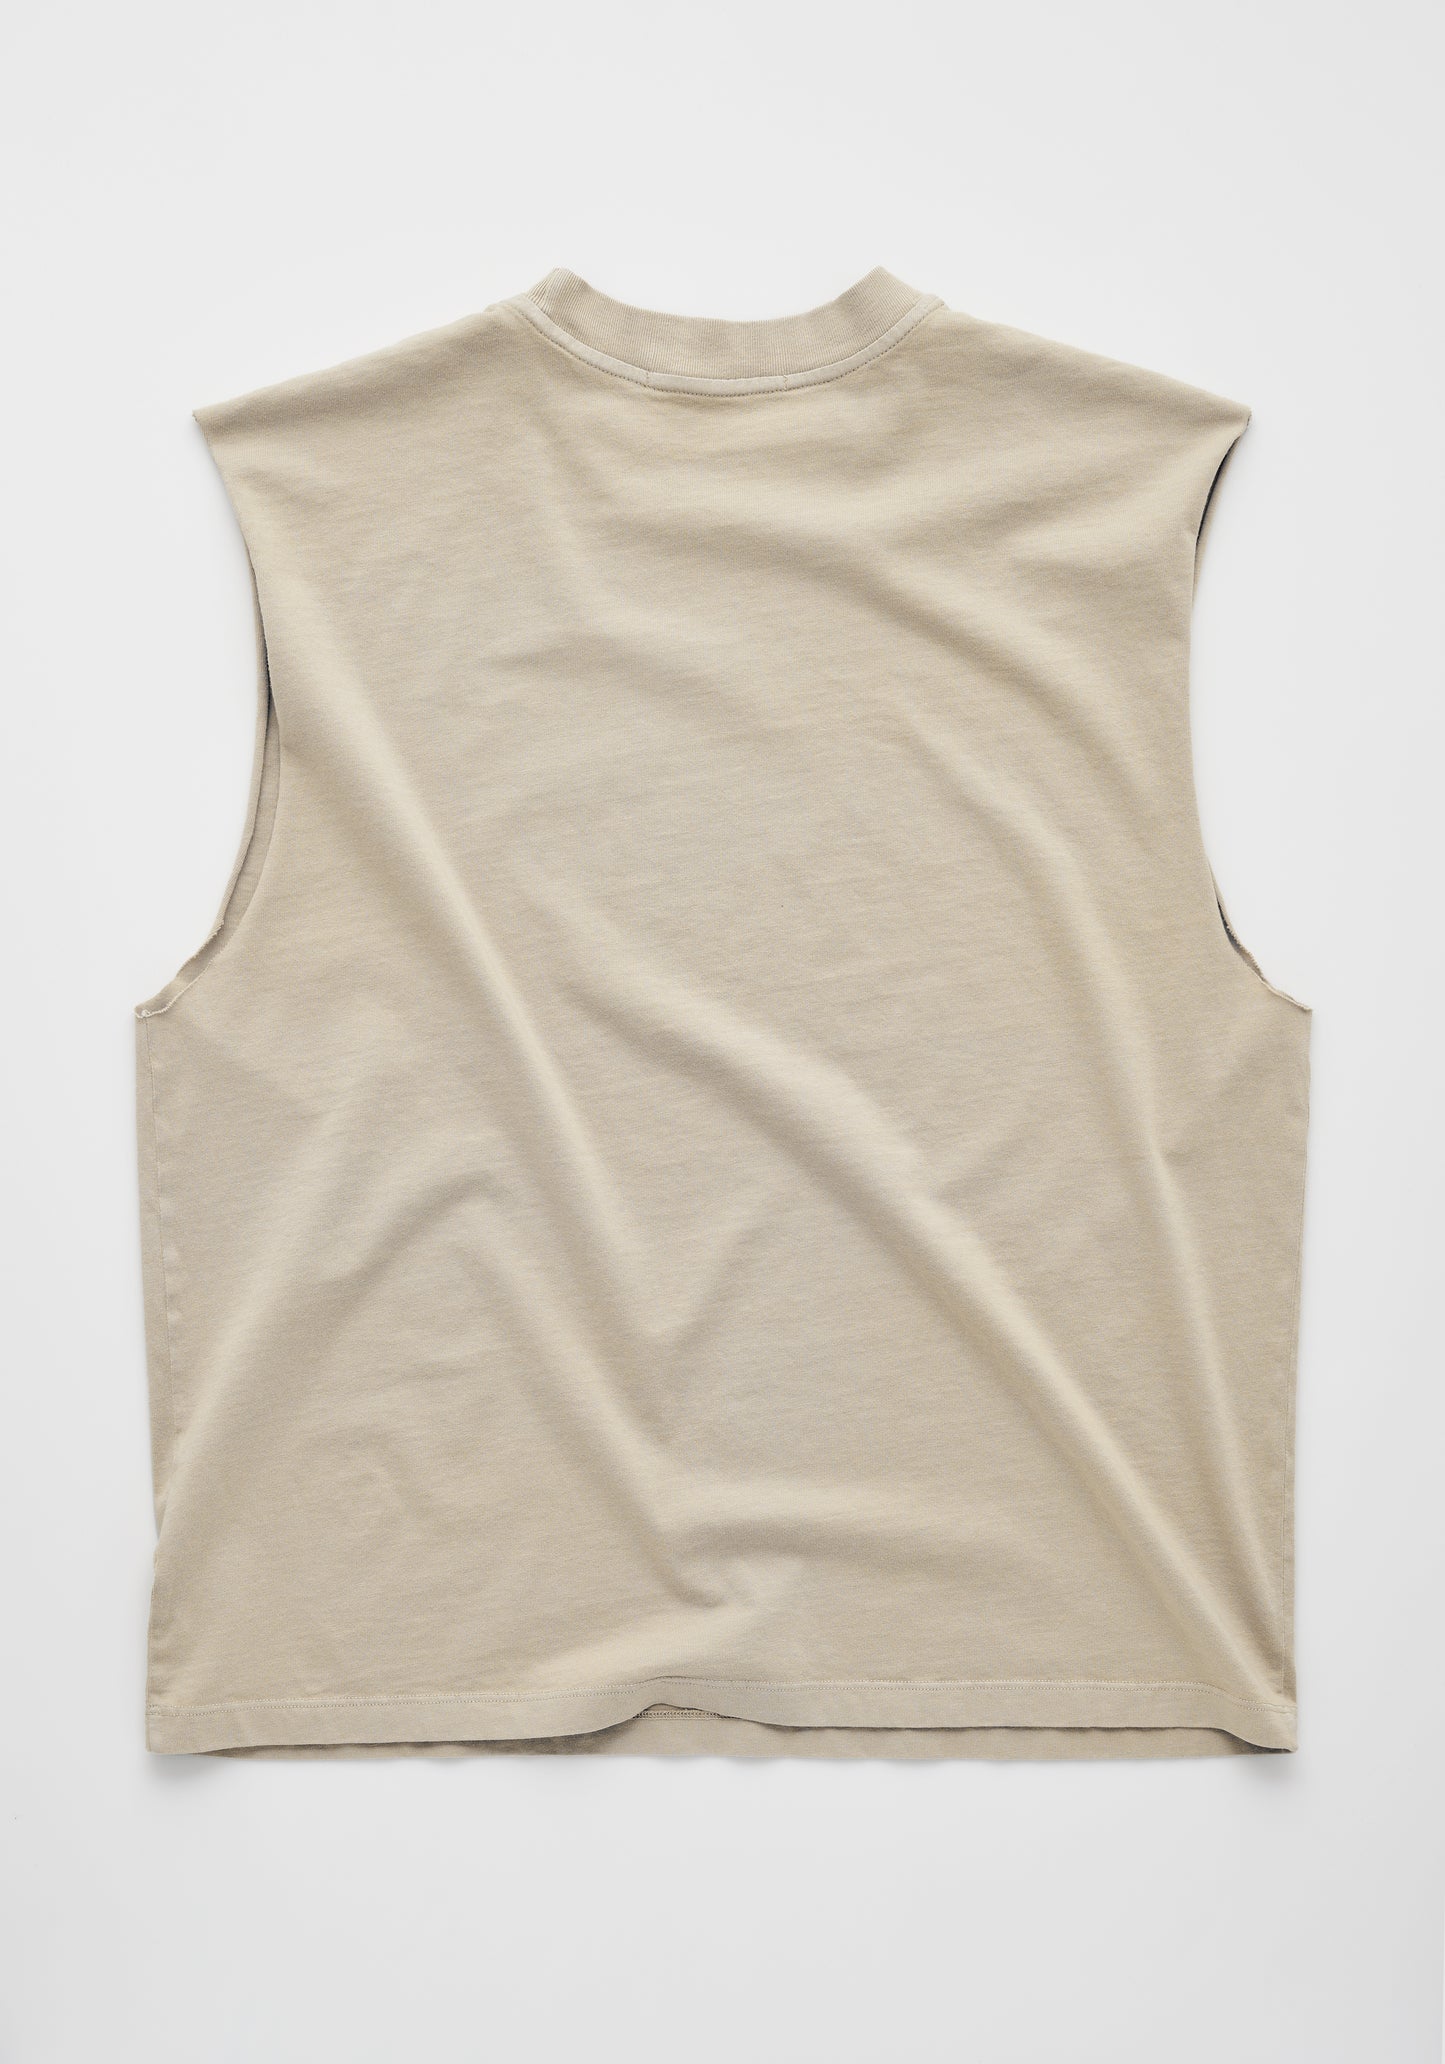 BODY FIT CUT-OFF TEE, SAND